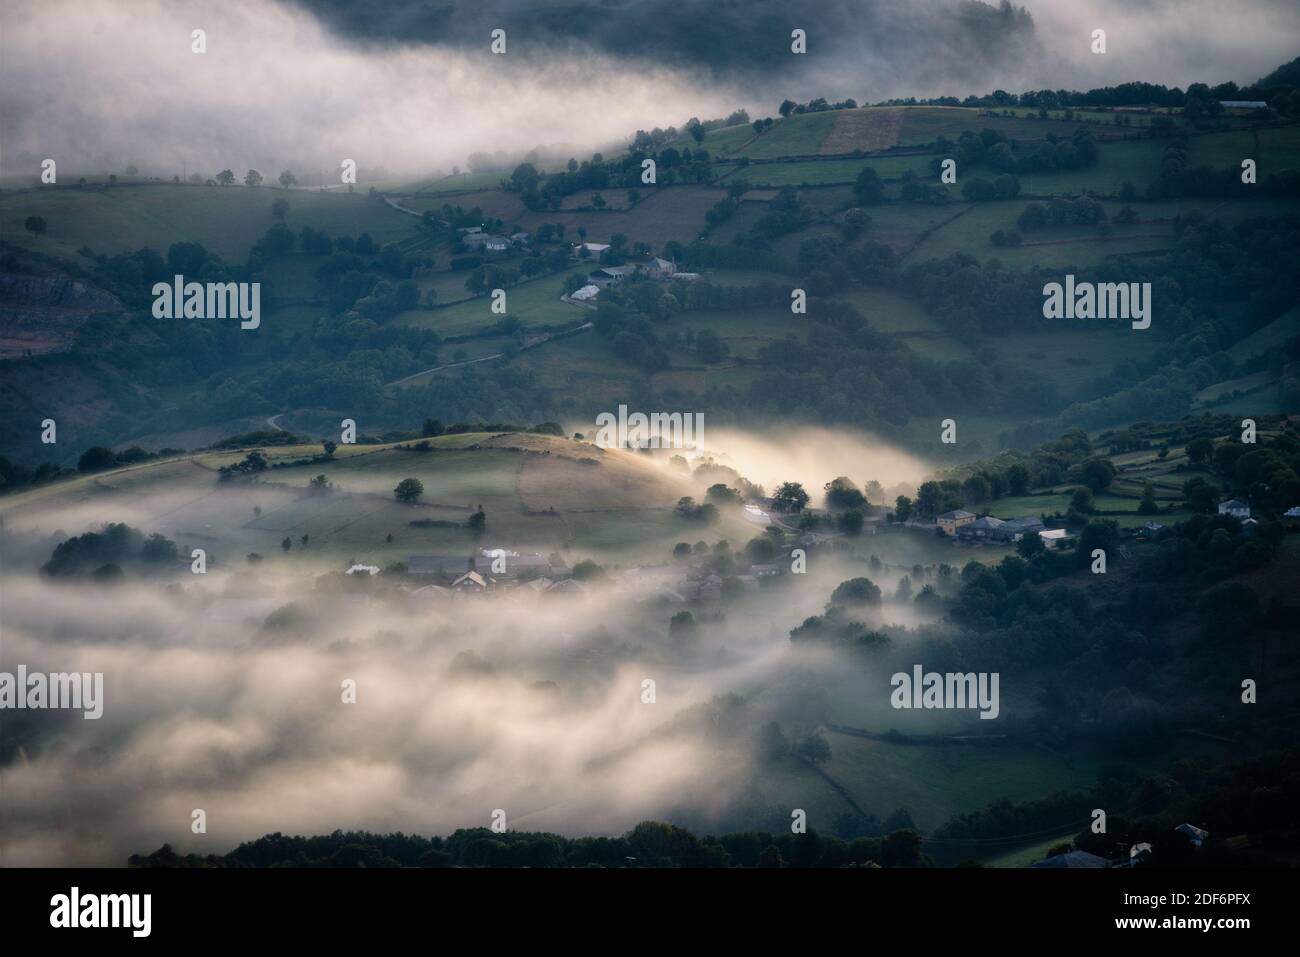 Stagnant fogs in the lowlands between hills in rural Galicia Stock Photo